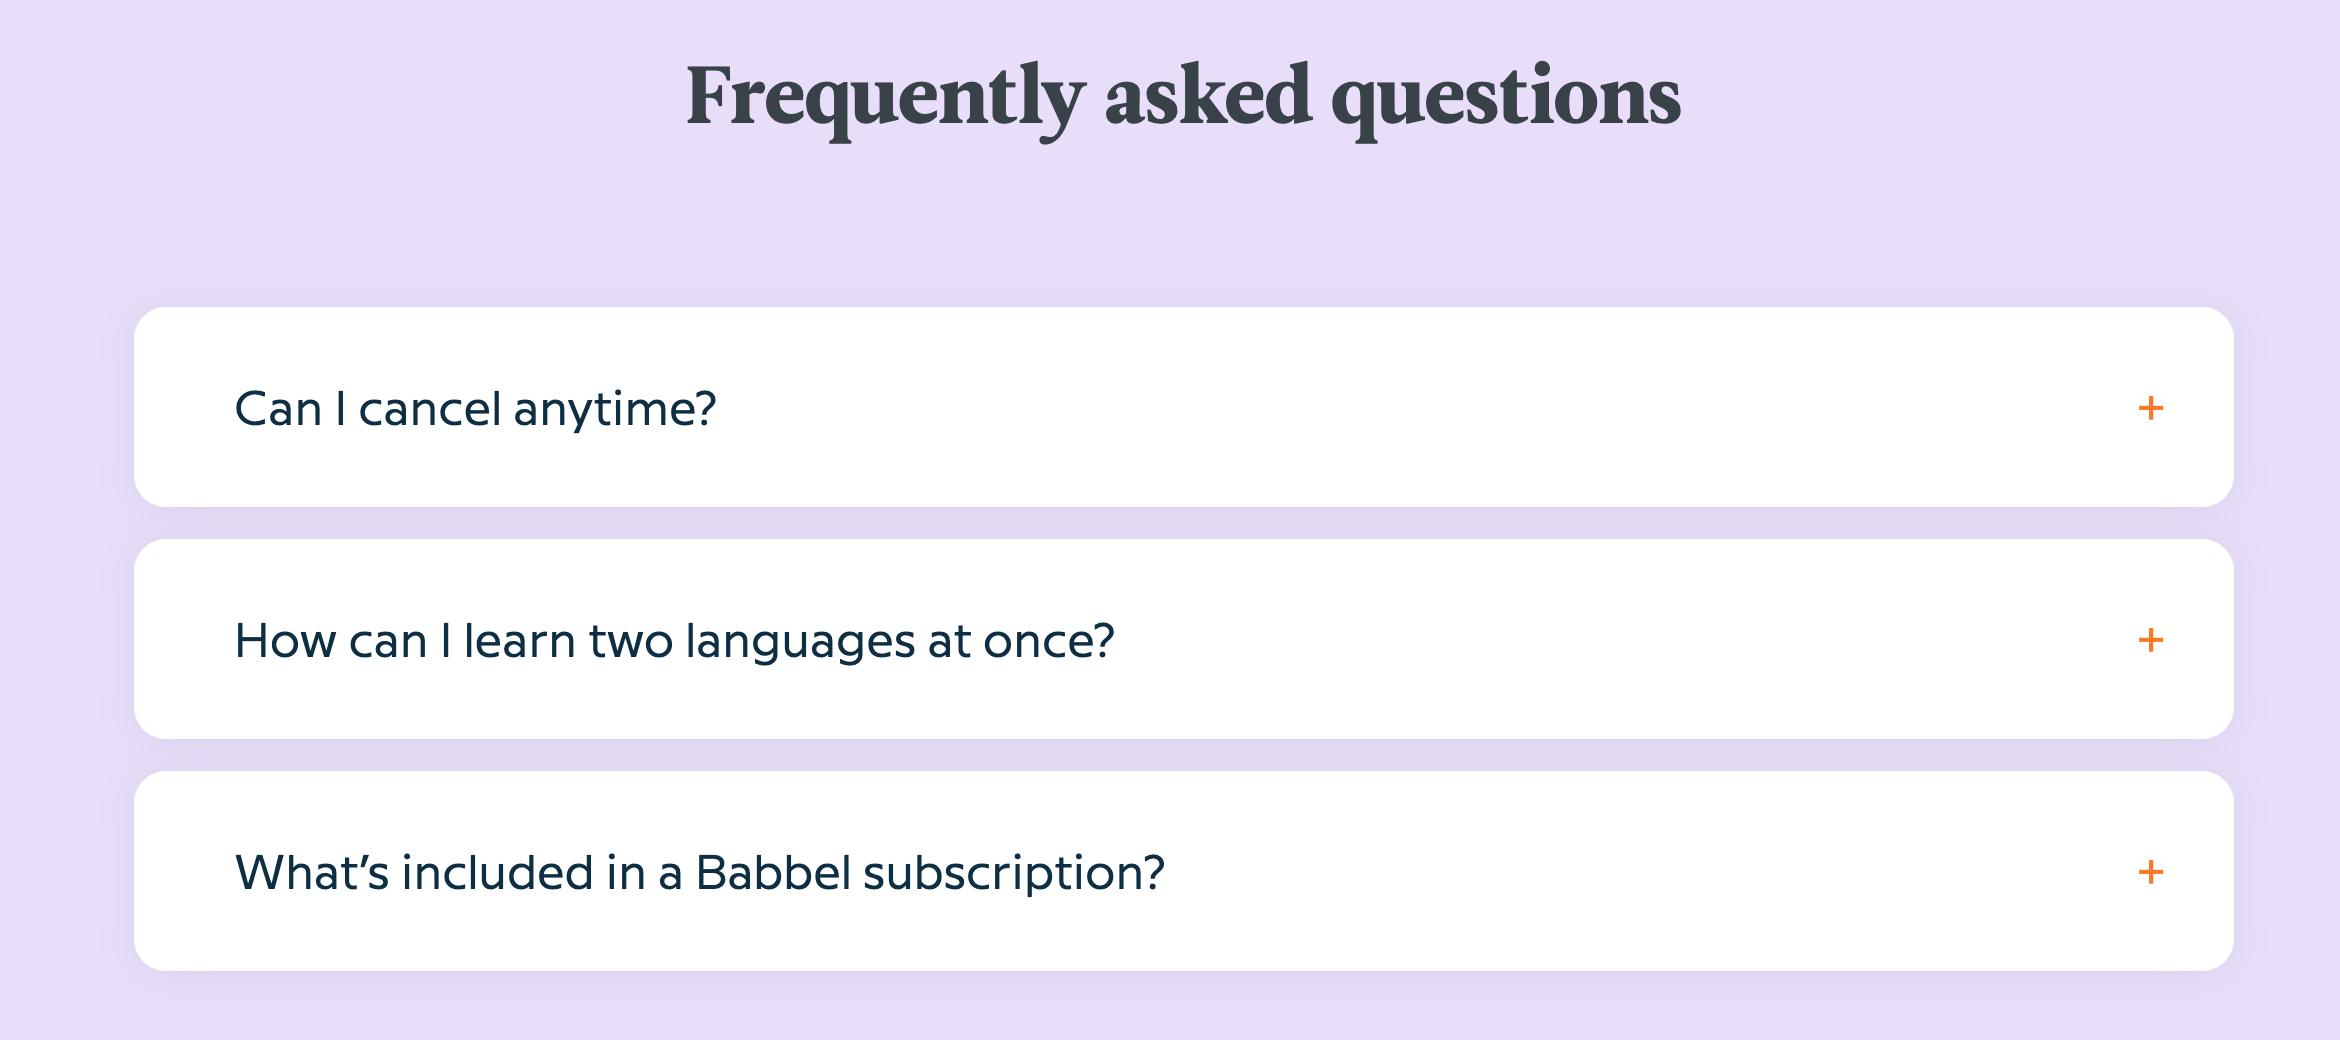 Frequently asked questions Babbel language learning tool